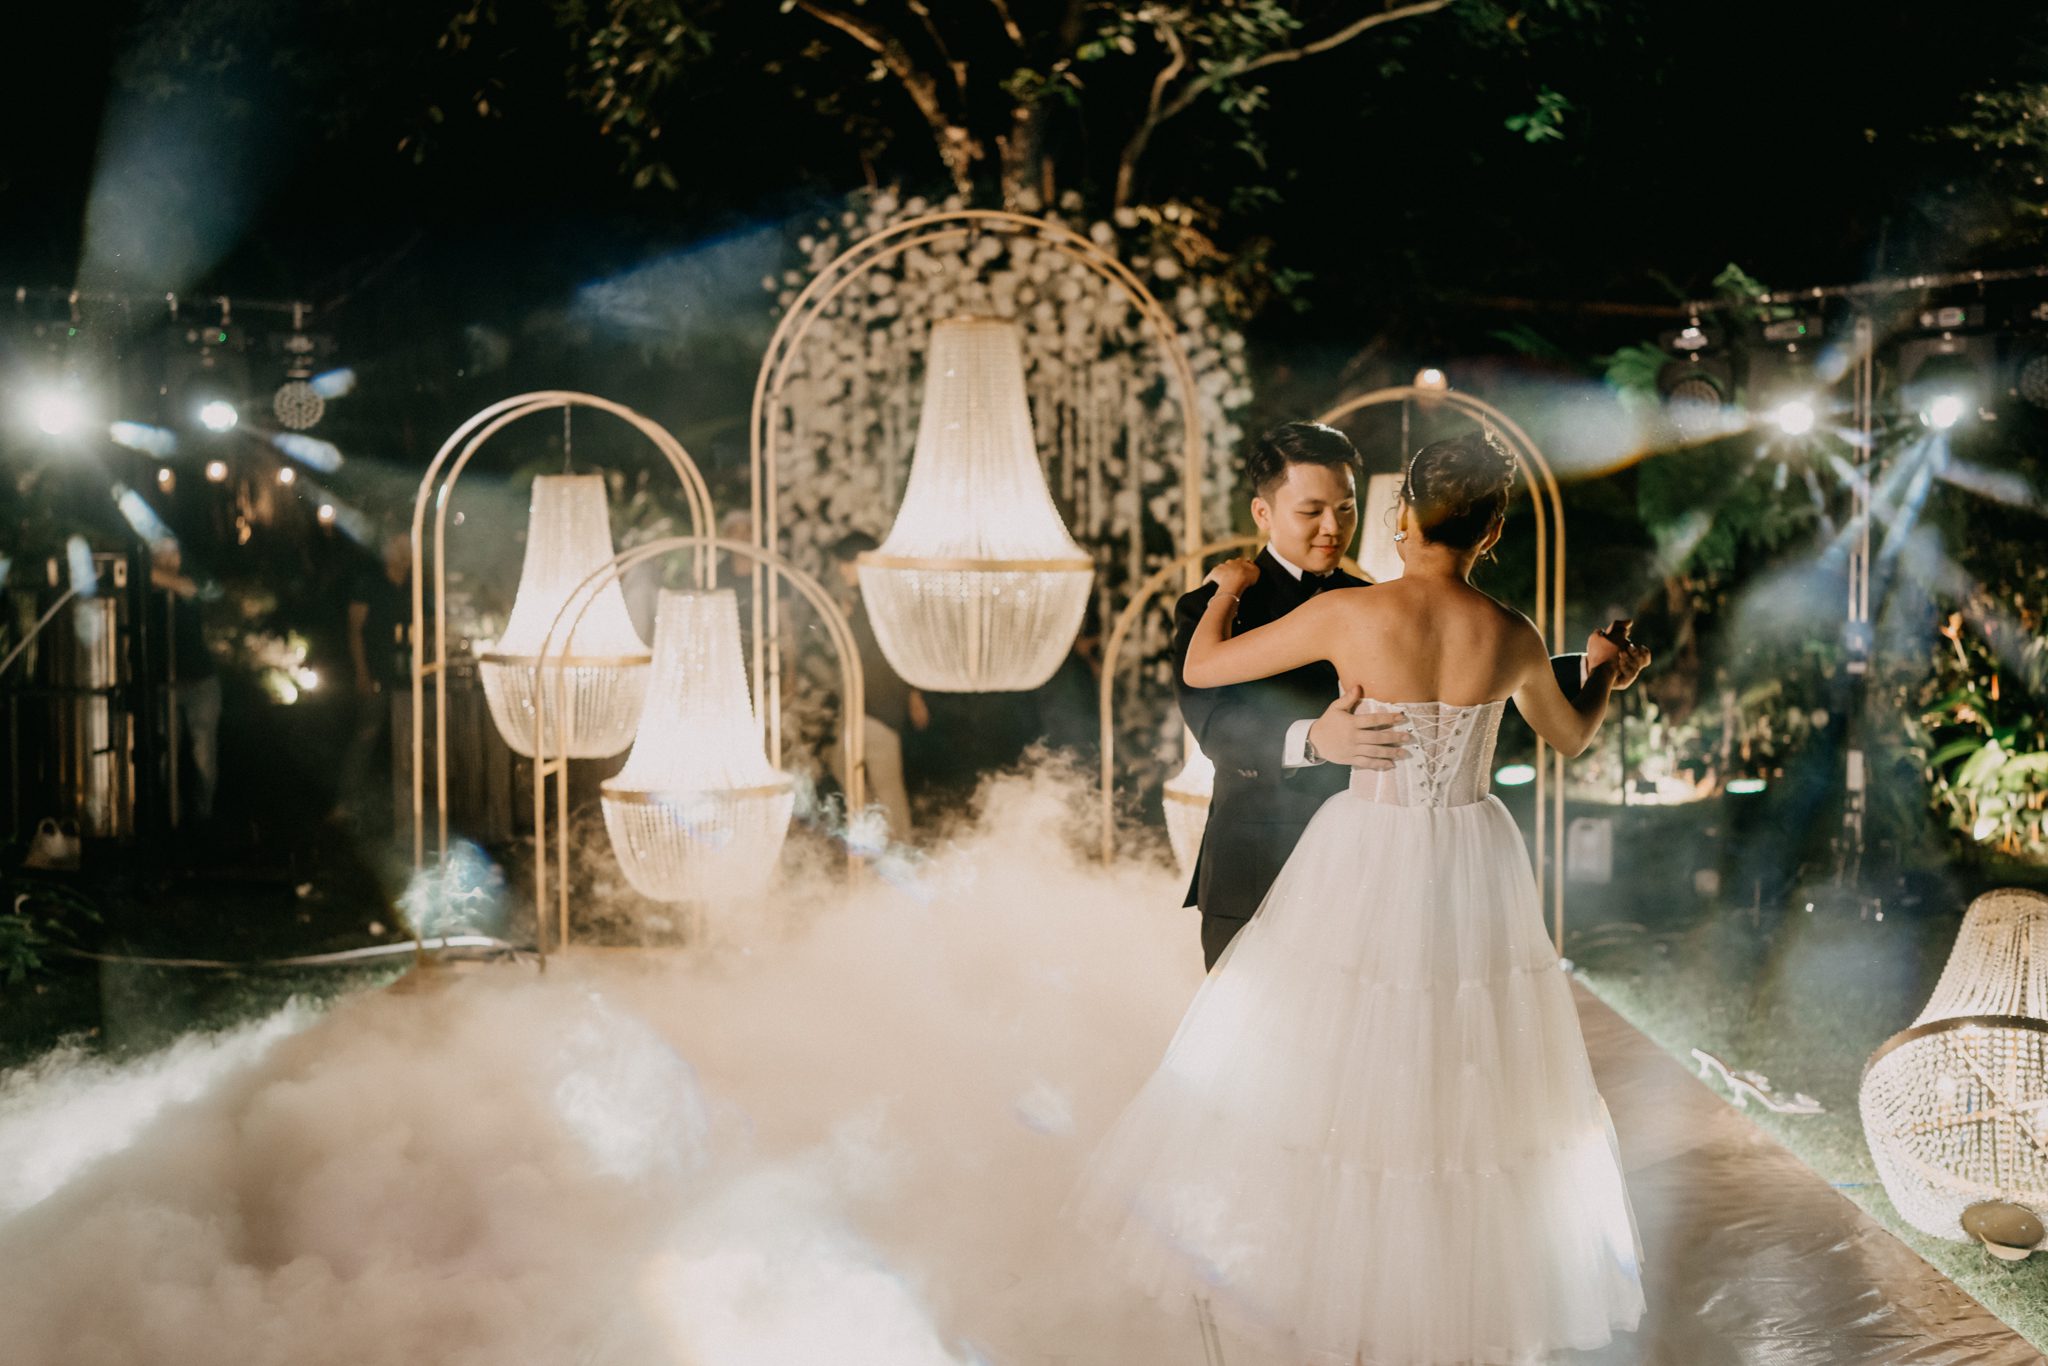 Saigon intimate wedding at An Lam Retreat 6519 - The Planners